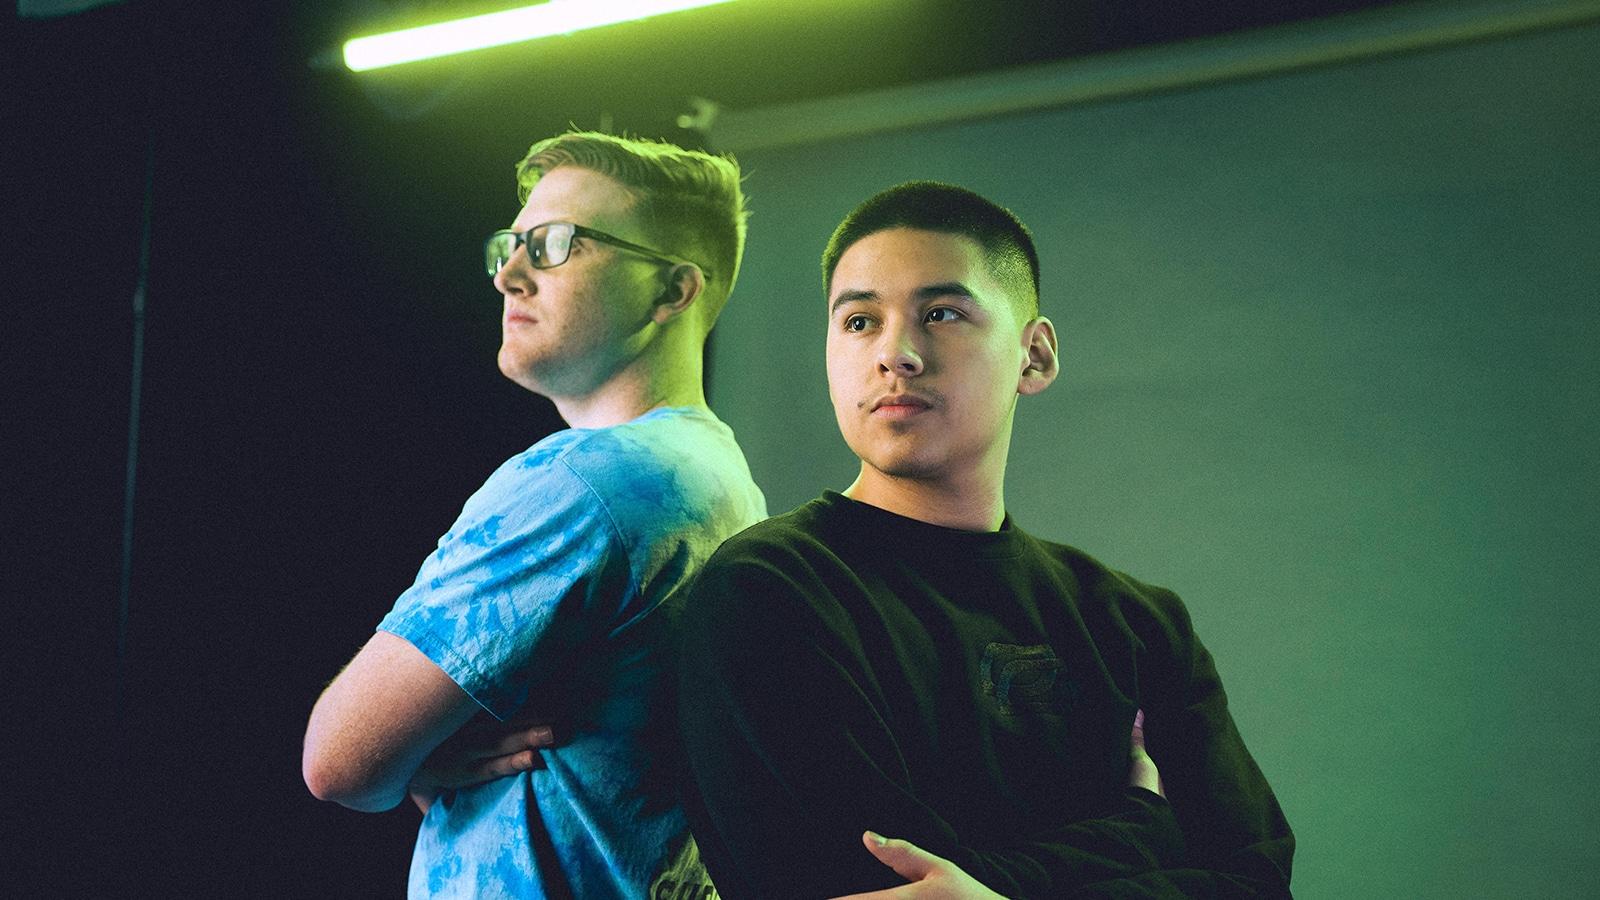 H3CZ & Hastr0 on OpTic Texas merger: “A match made in heaven” - Dexerto